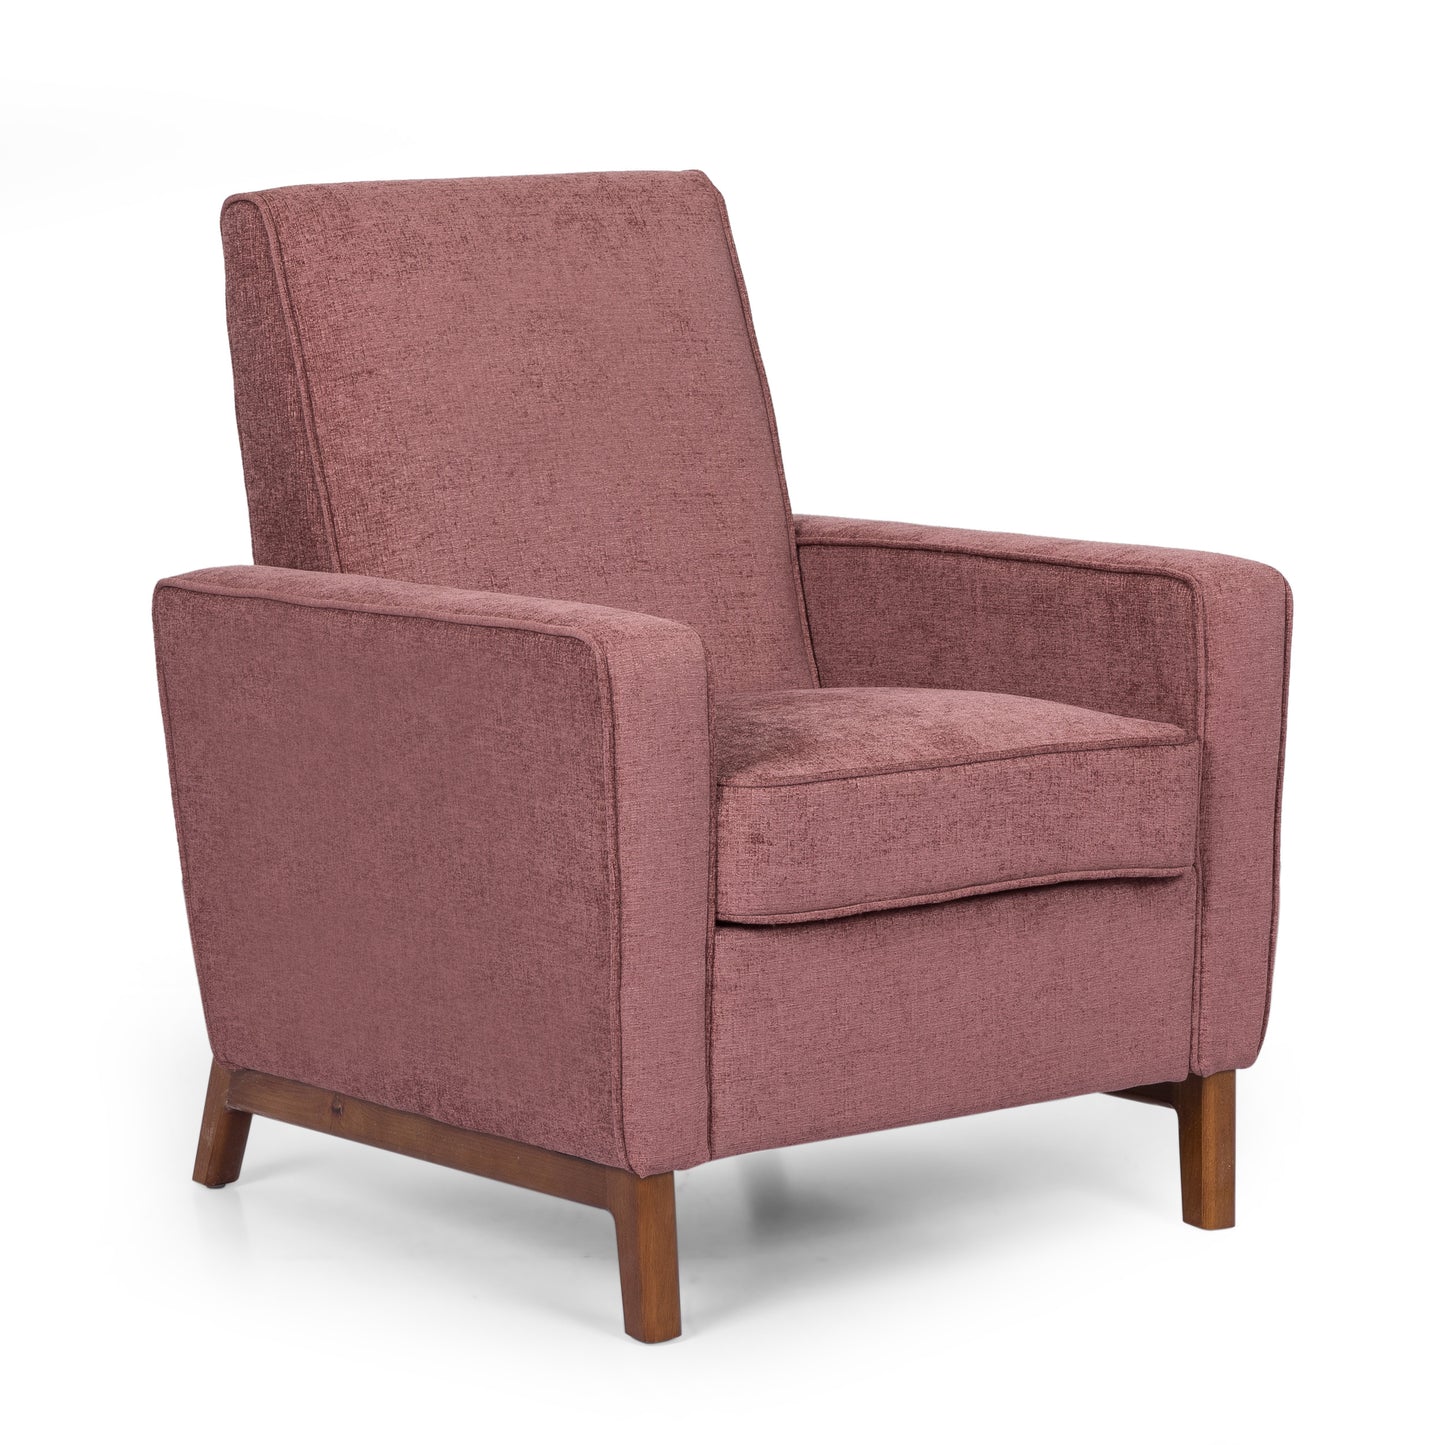 Haston Contemporary Upholstered Club Chair